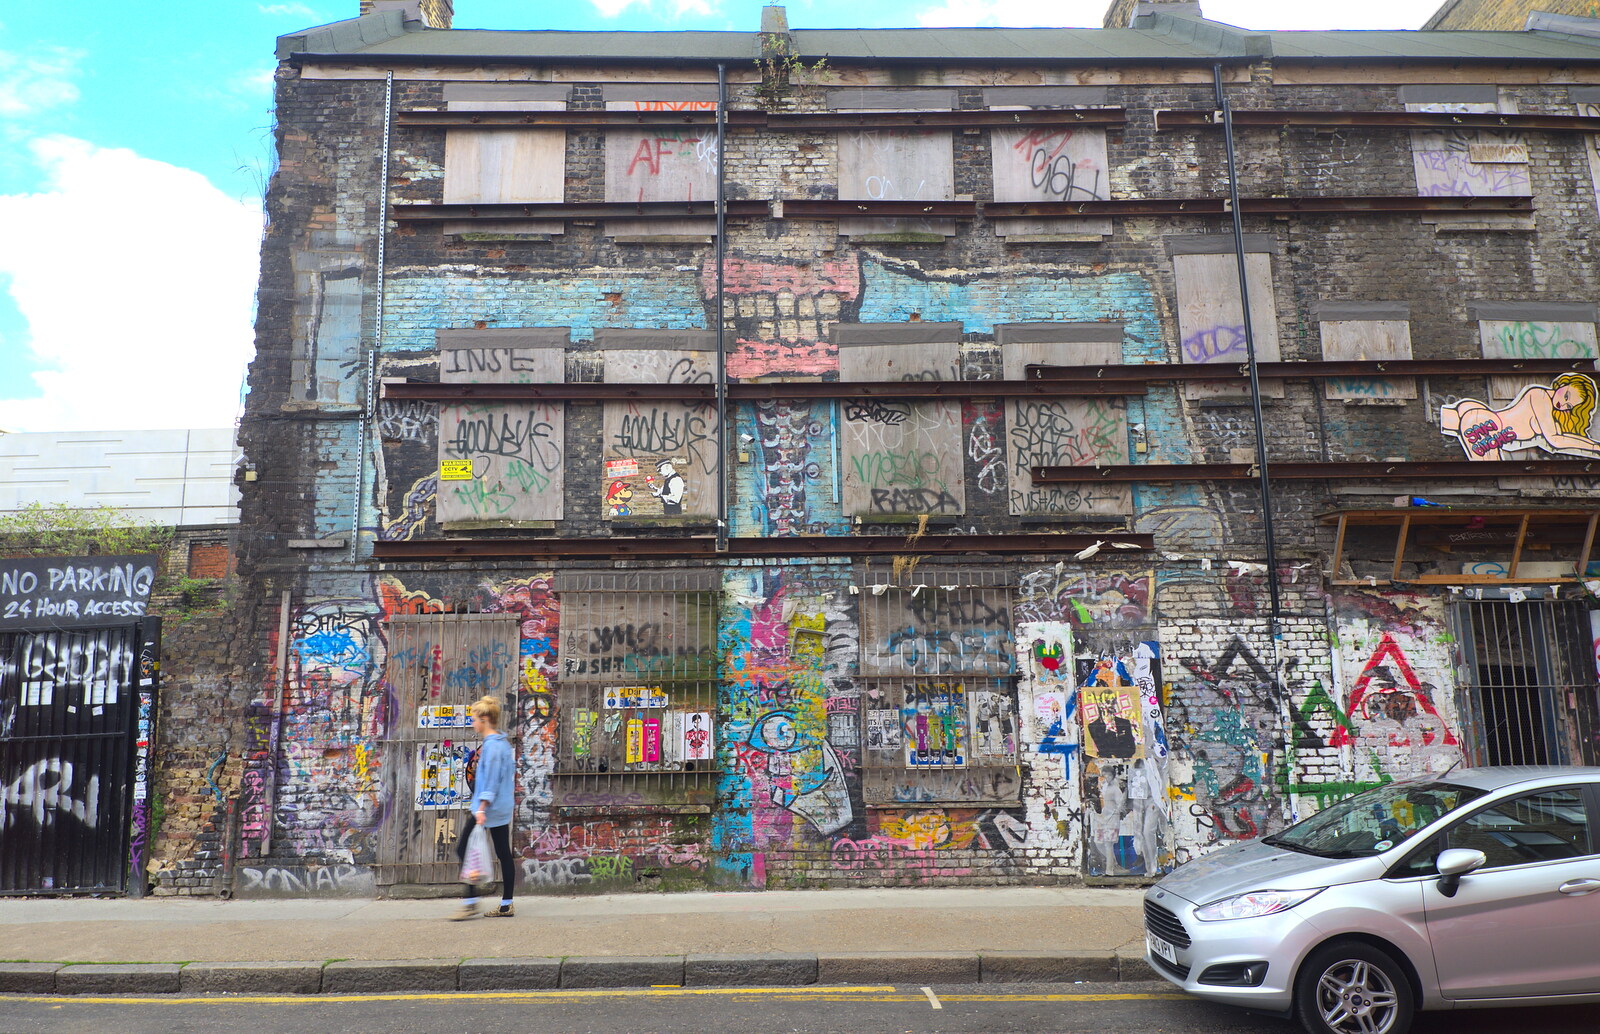 A derelict boarded-up building from Spitalfields and Brick Lane Street Art, Whitechapel, London - 10th August 2013